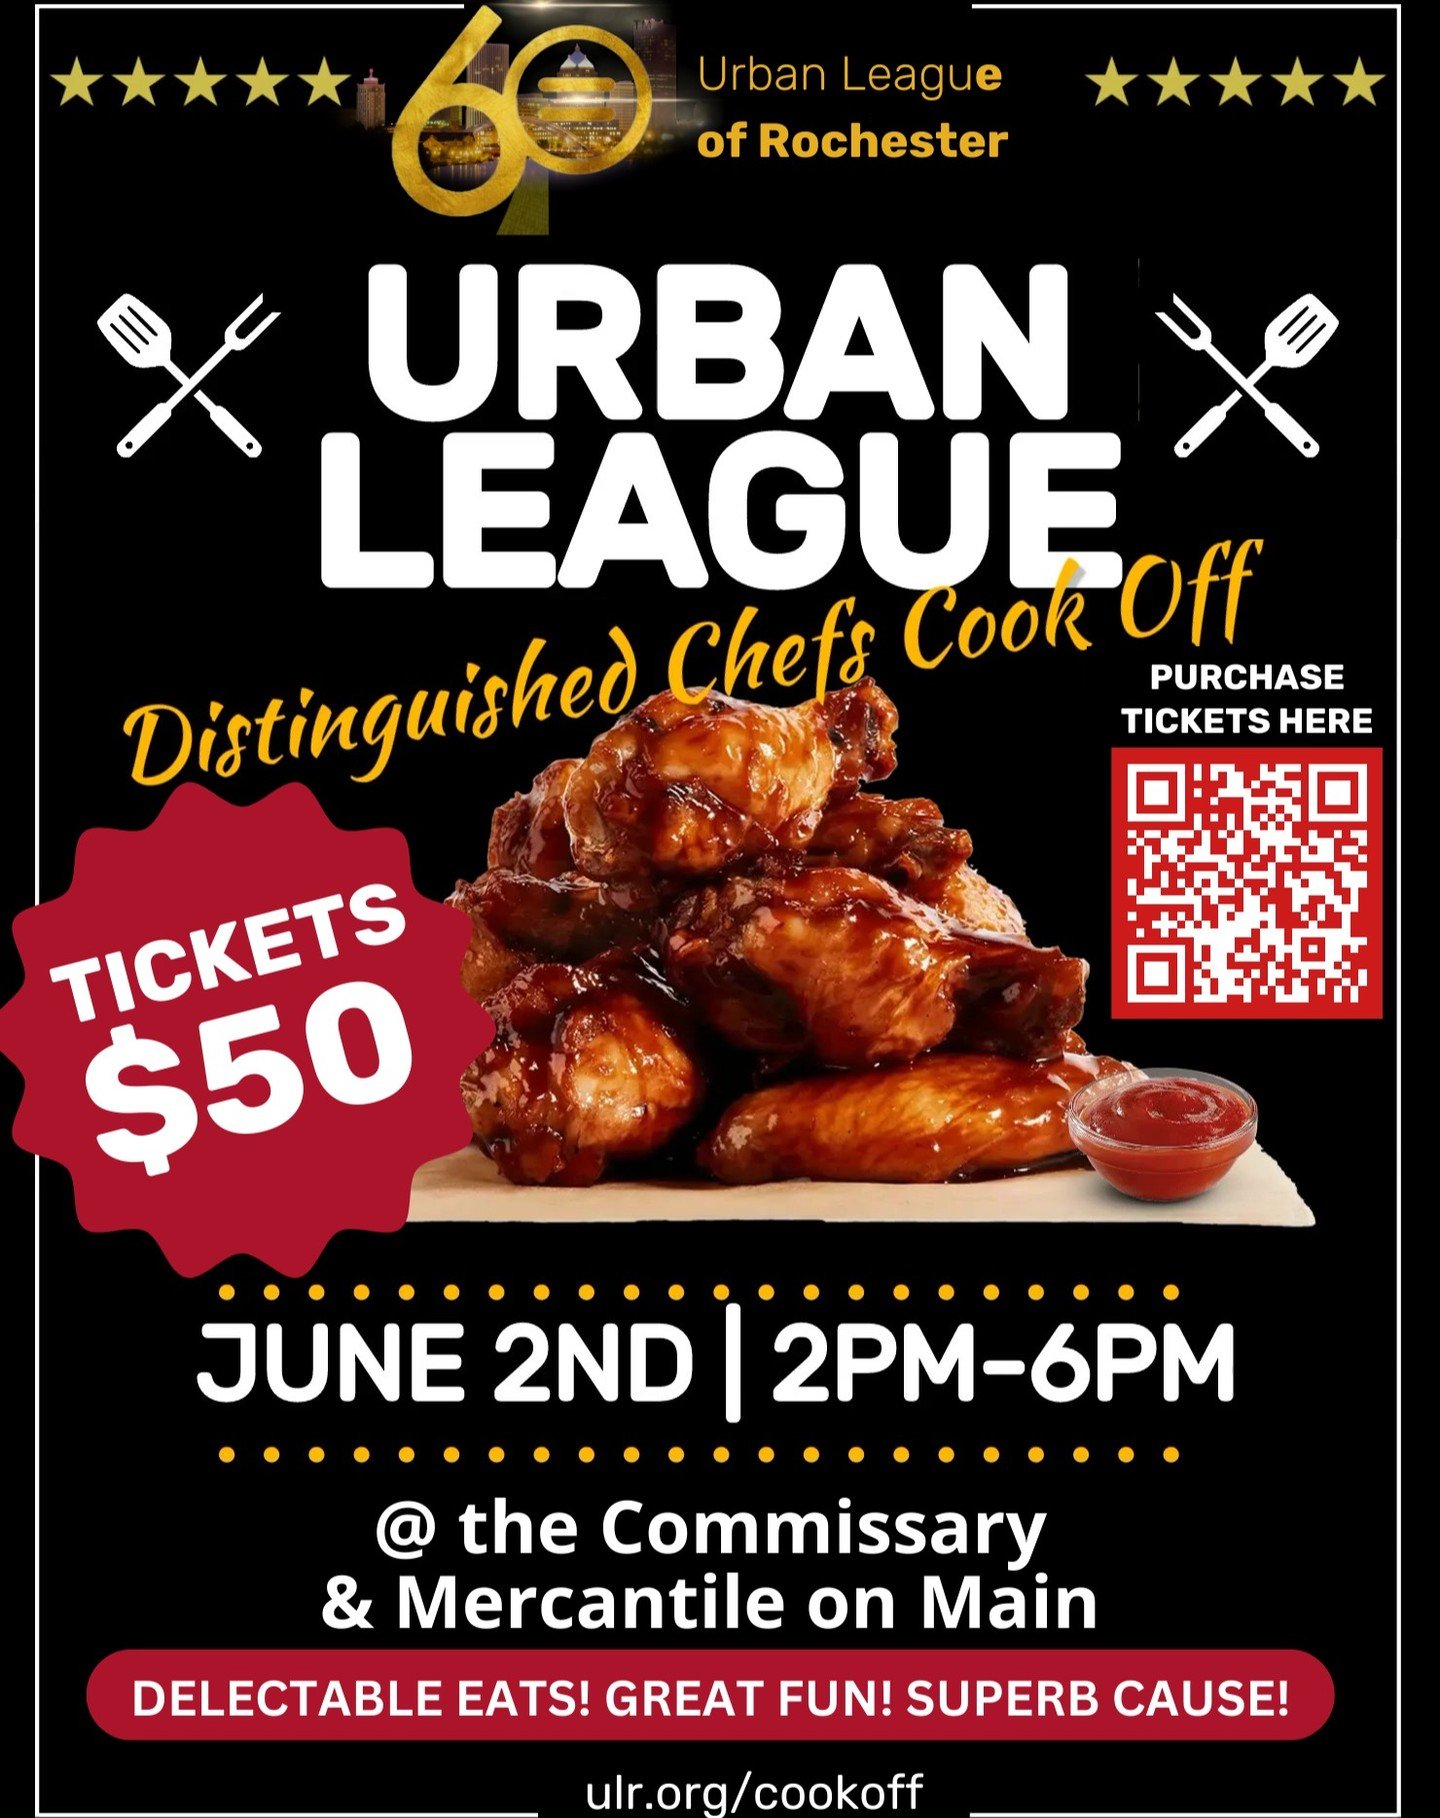 Good eats. Good times. GREAT CAUSE! 
Get. Your. Tickets. TODAY!
Buy 'em at ulr.org/cookoff.
#blackscholars #urbanleagueroc #rochesterny #foodtasting #fundraiser #roccommissary #merconmain